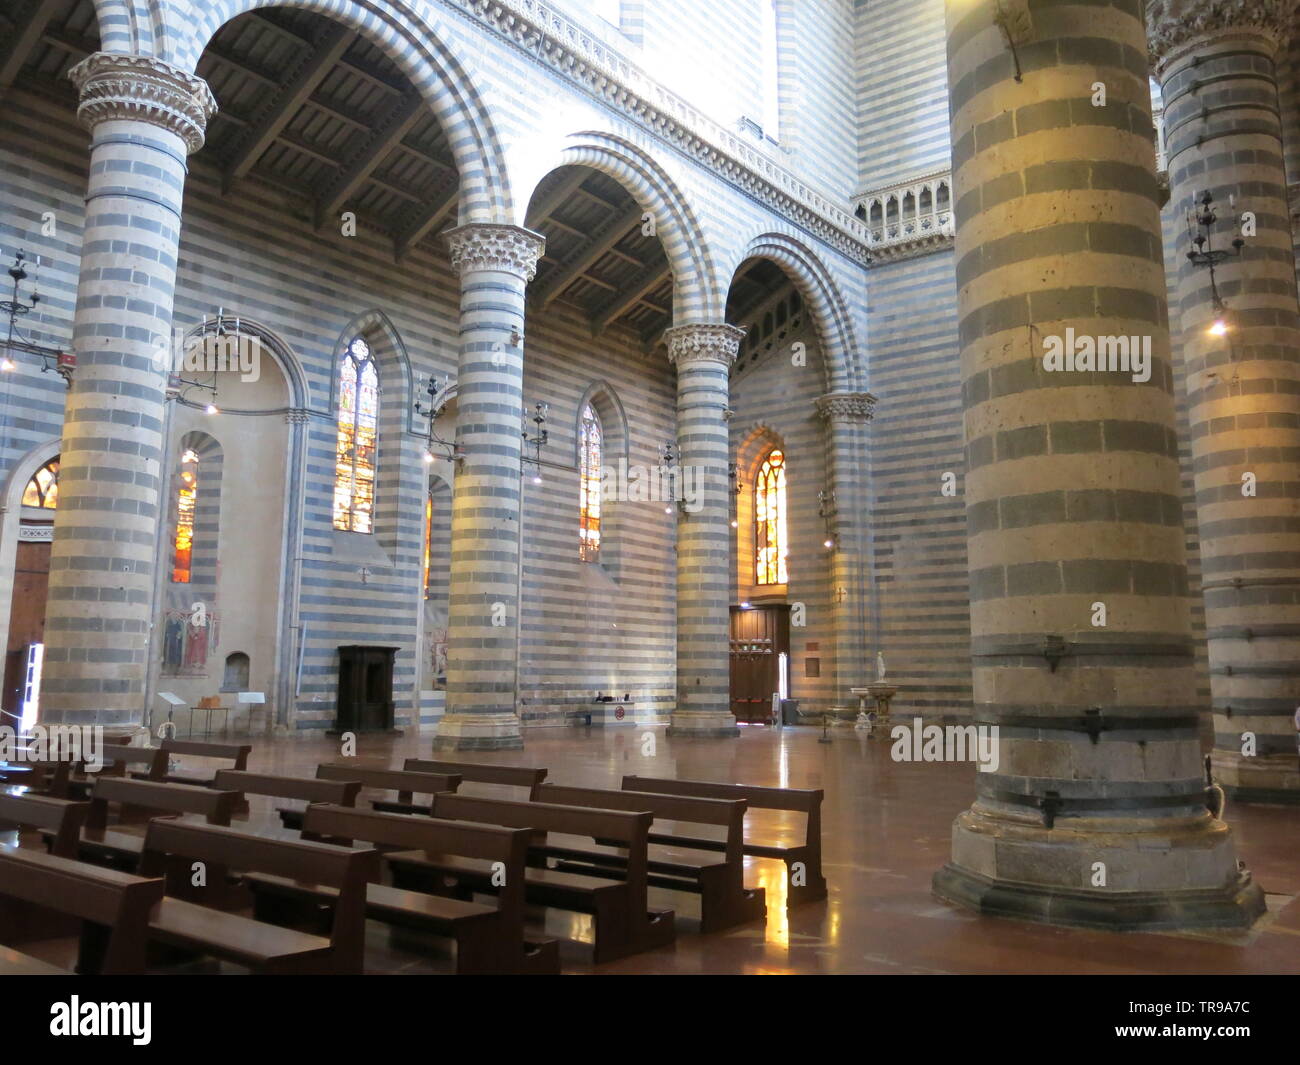 Alternate rows of basalt and travertine create a black & white striped effect on the interior columns of the 14th century cathedral at Orvieto, Italy Stock Photo